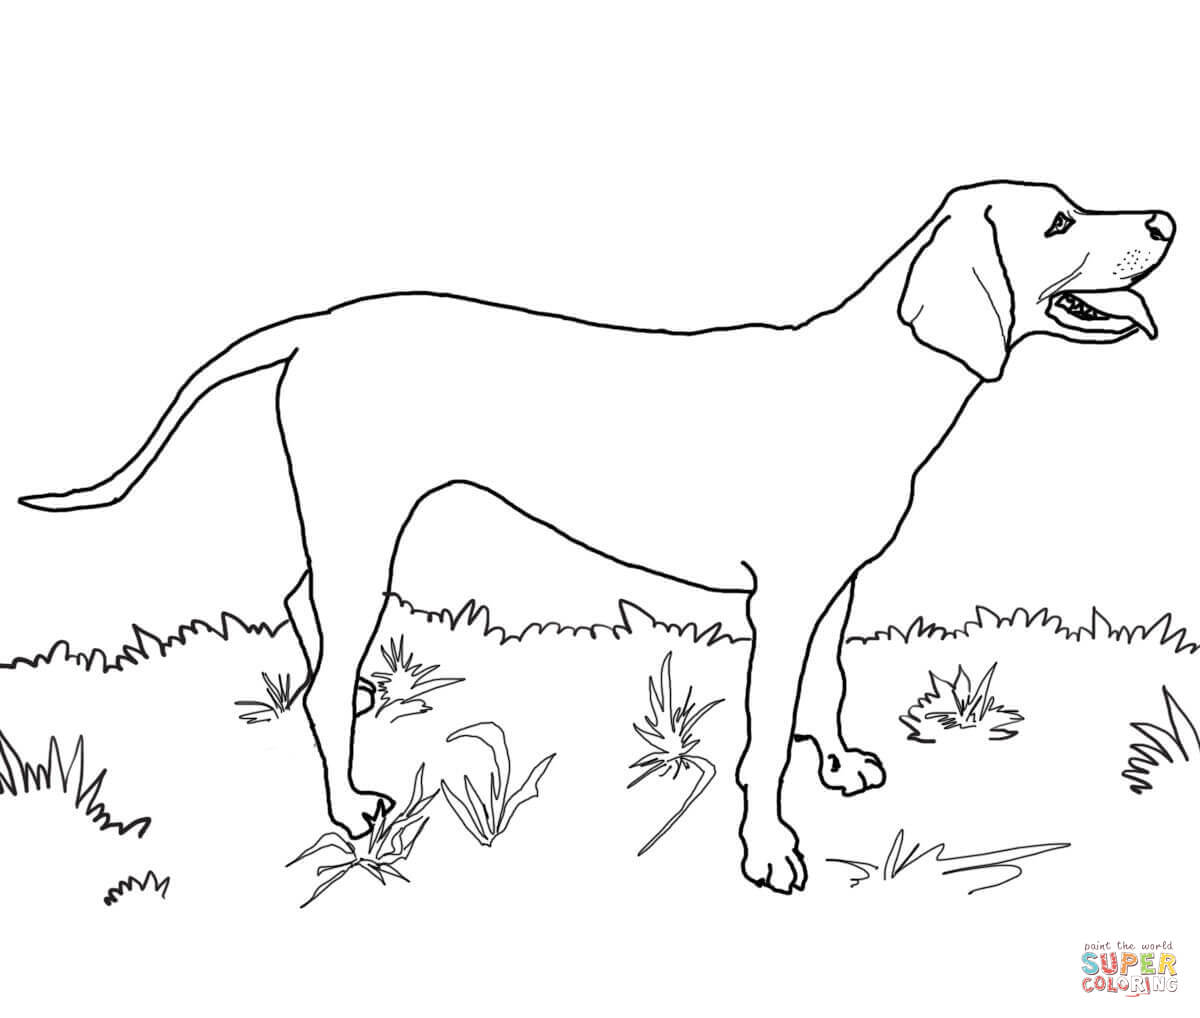 Great Dane coloring page | Free Printable Coloring Pages